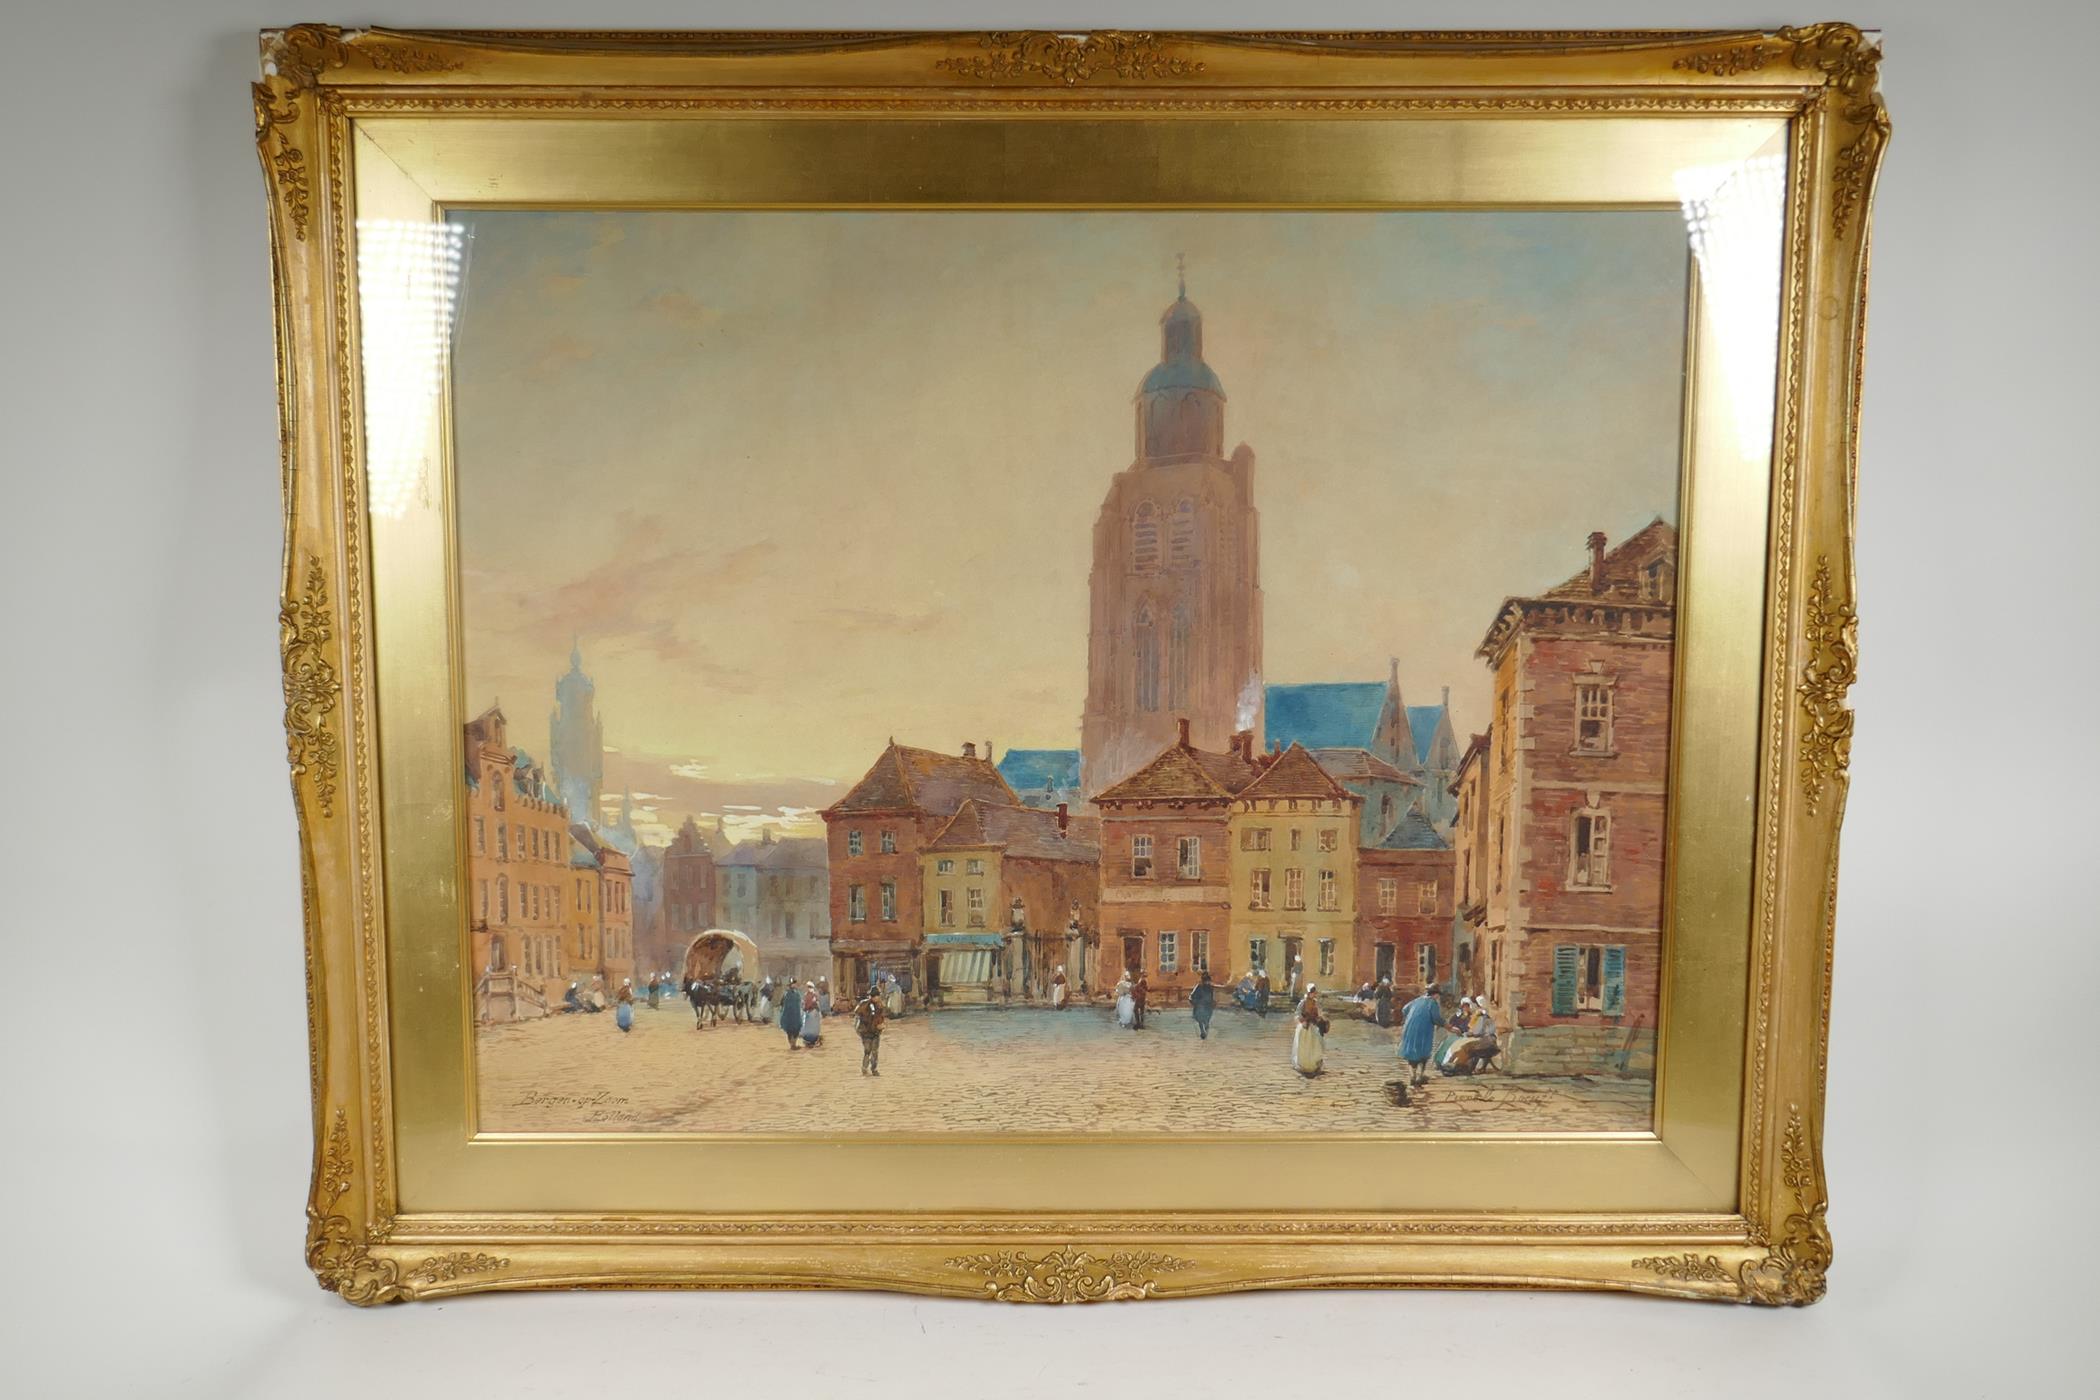 Pierre Le Boeuf, French C19th, Bergen op Zoom, Holland, city square, watercolour, 26" x 20" - Image 2 of 5